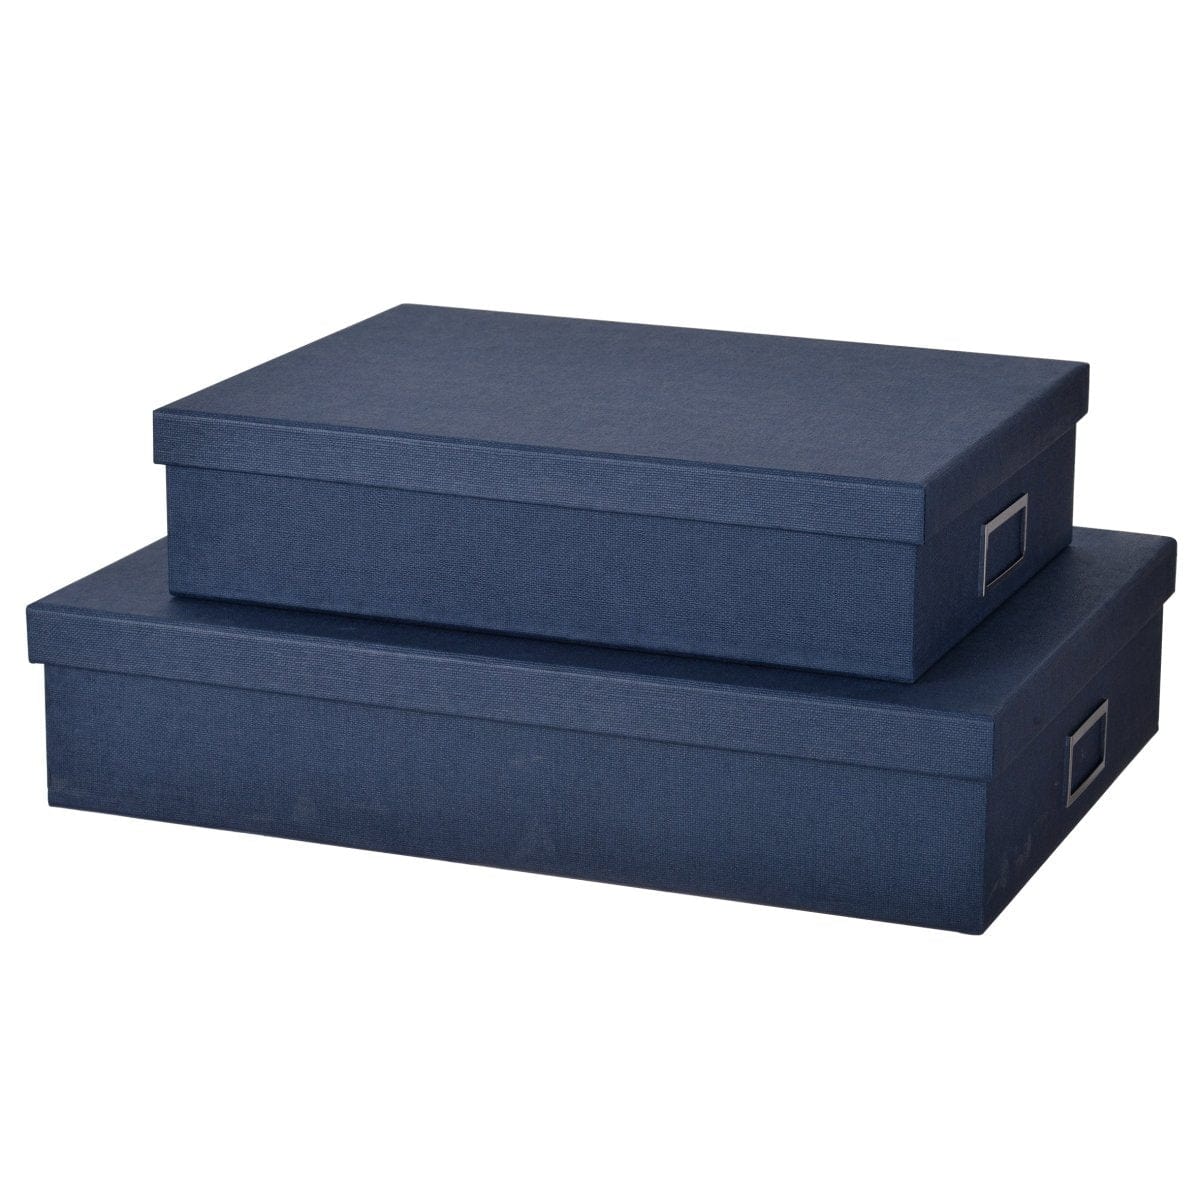 AB-42021  S/2 ISMAY LIDDED STORAGE BOXES,BLUE picket and rail